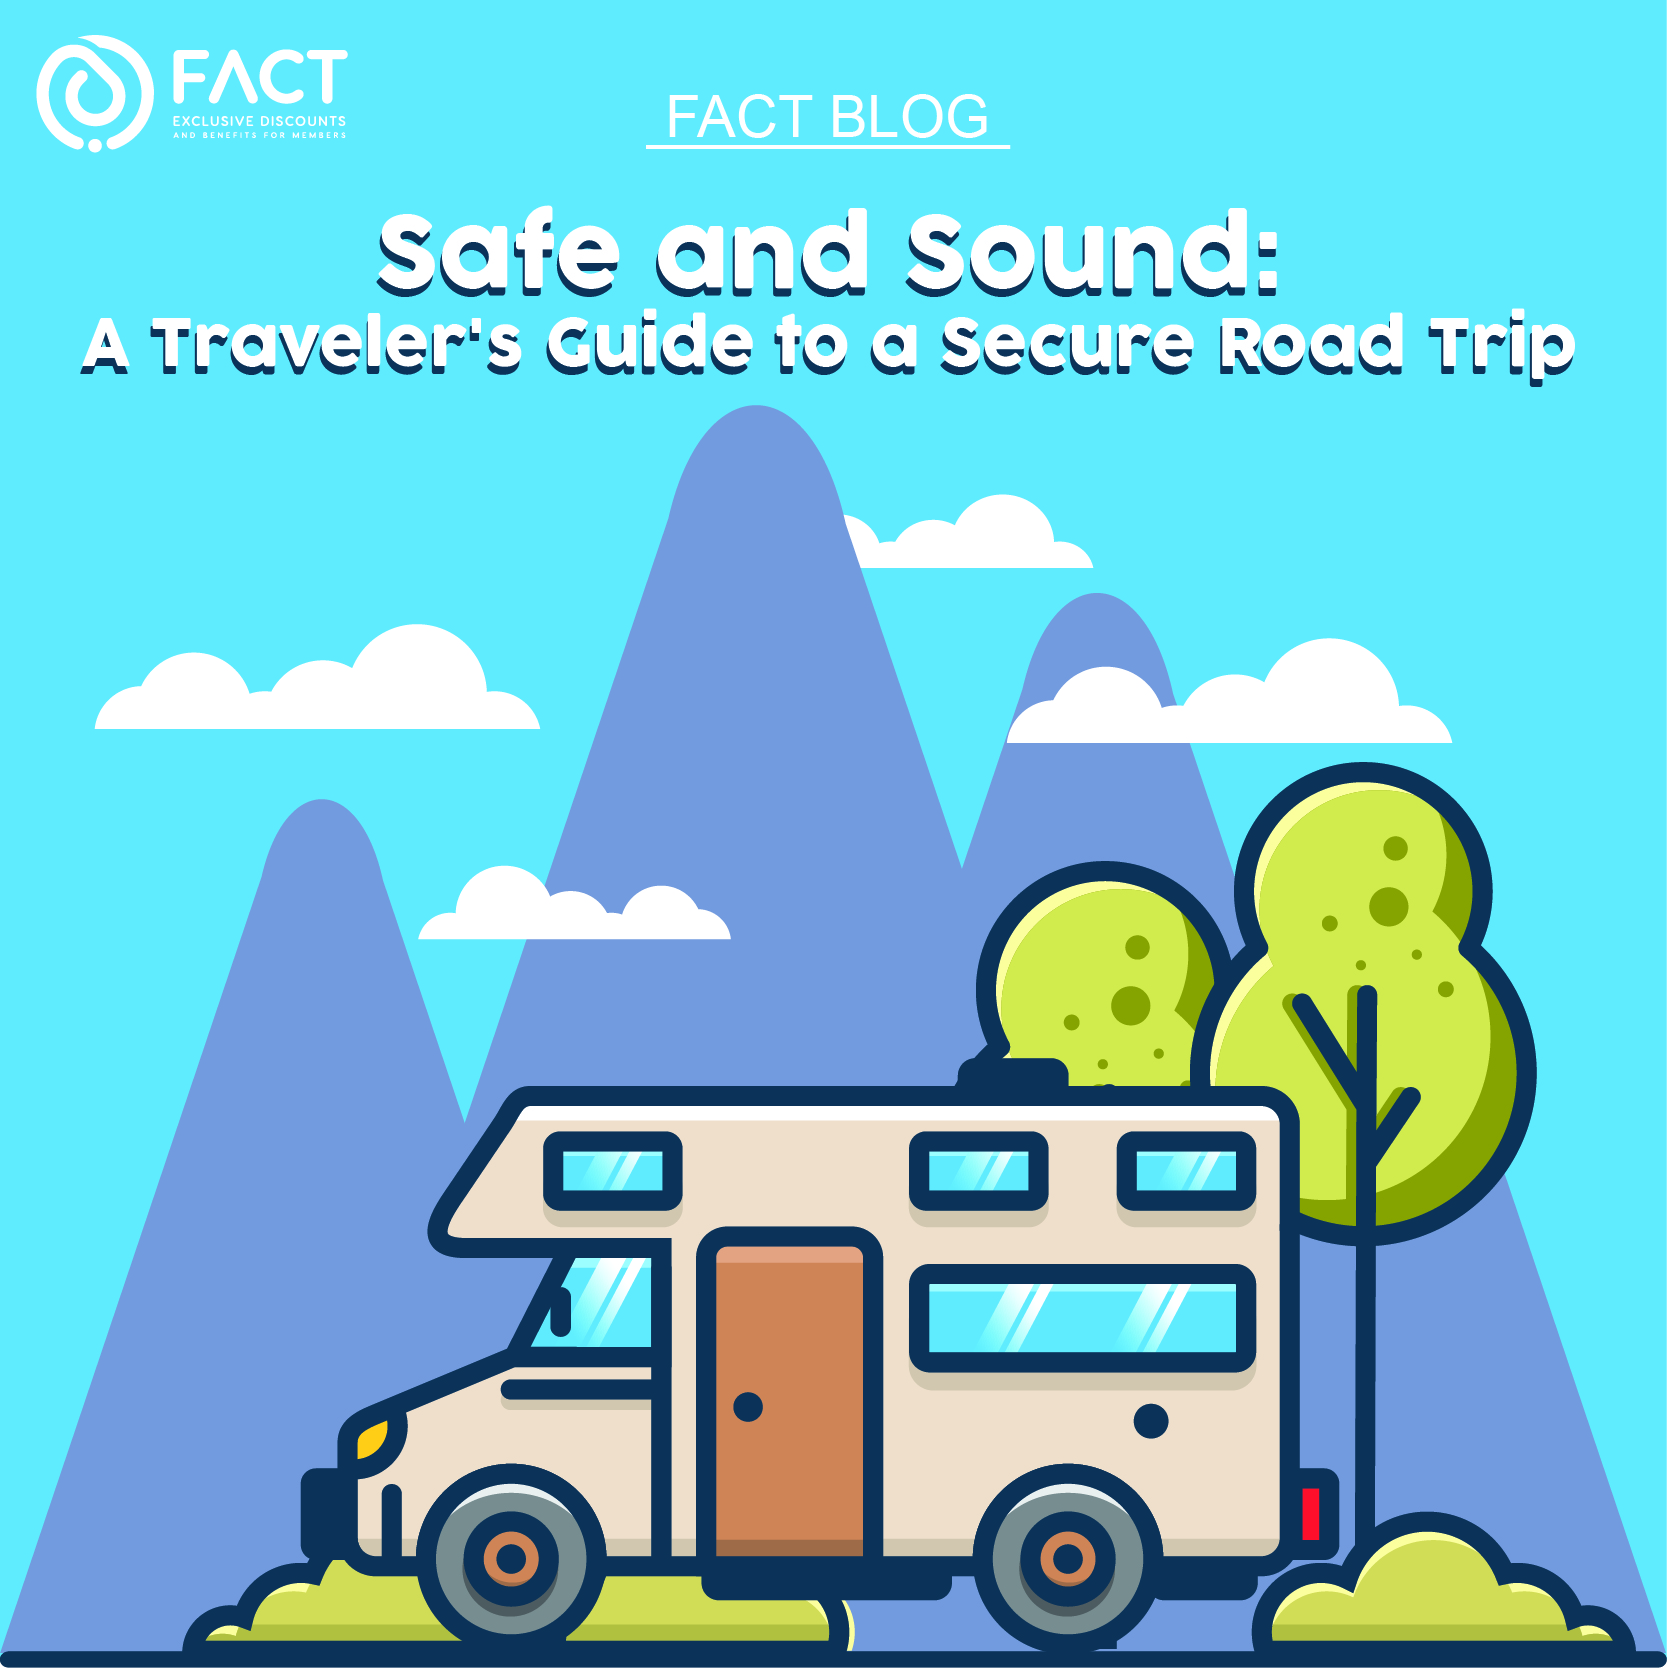 Safe and Sound: The Traveler's Guide to a Secure Road Trip